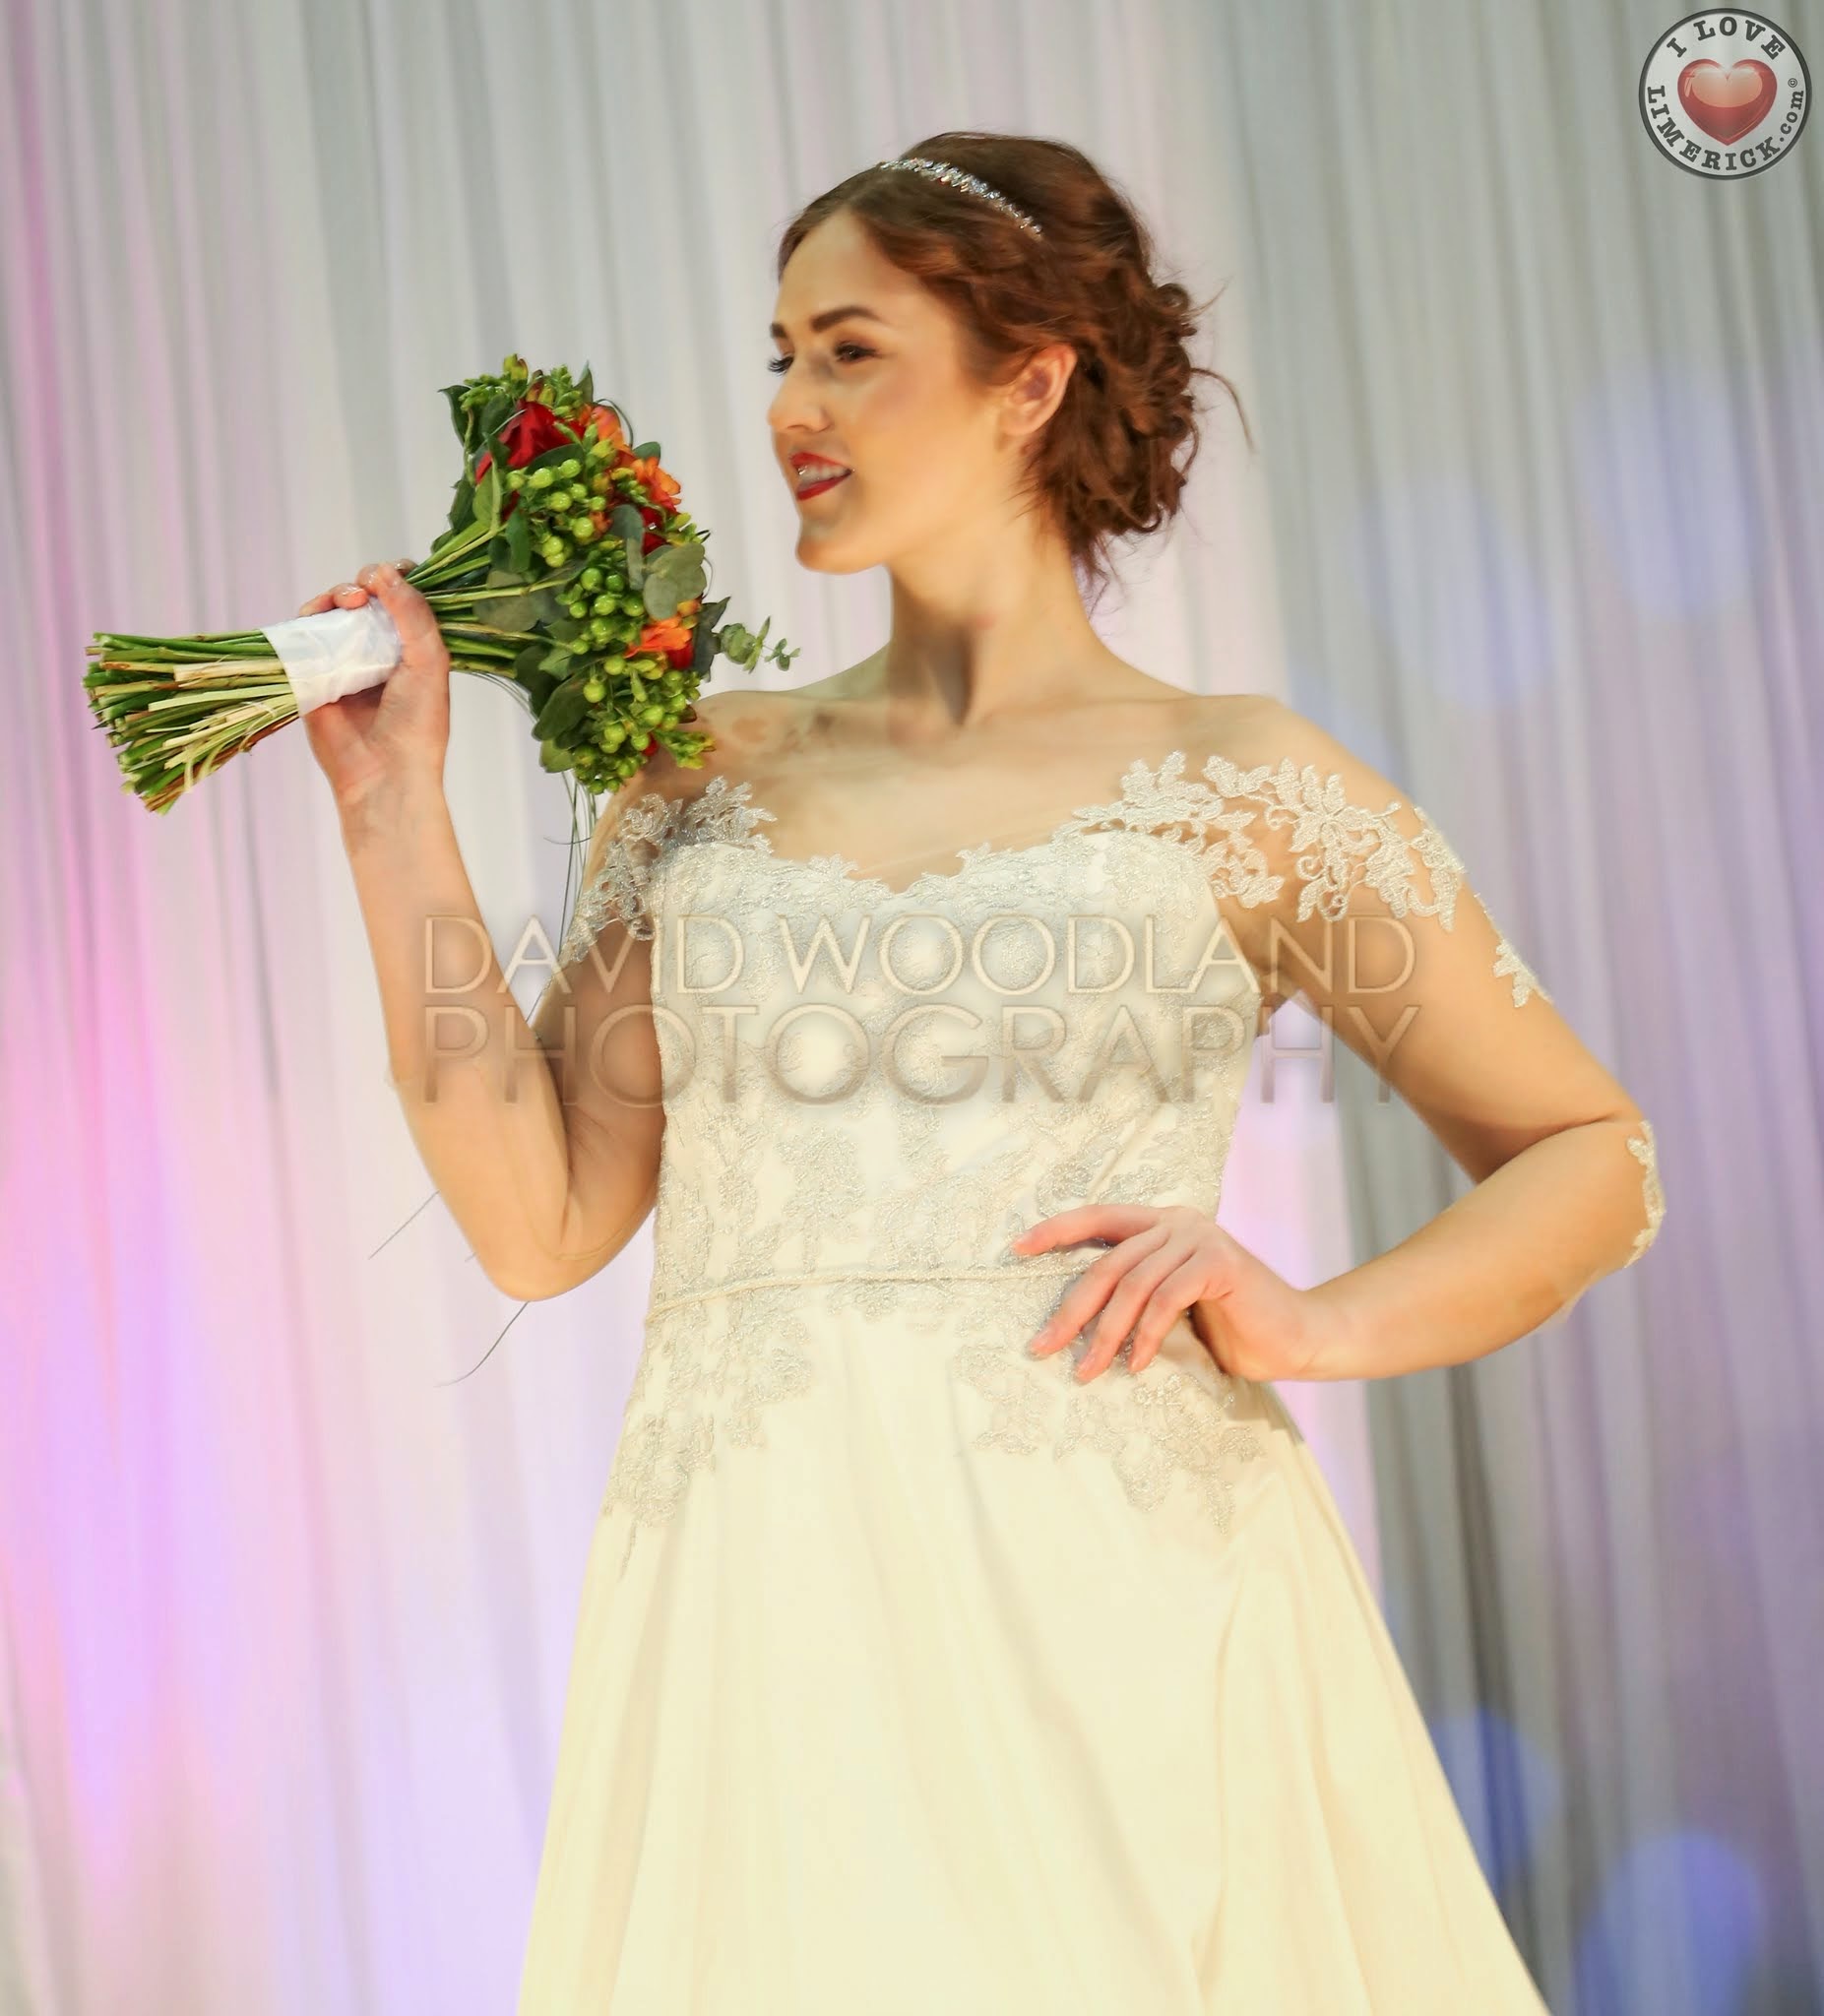 Mid-West-Bridal-Exhibition-2015.-Day-1.-DW-66